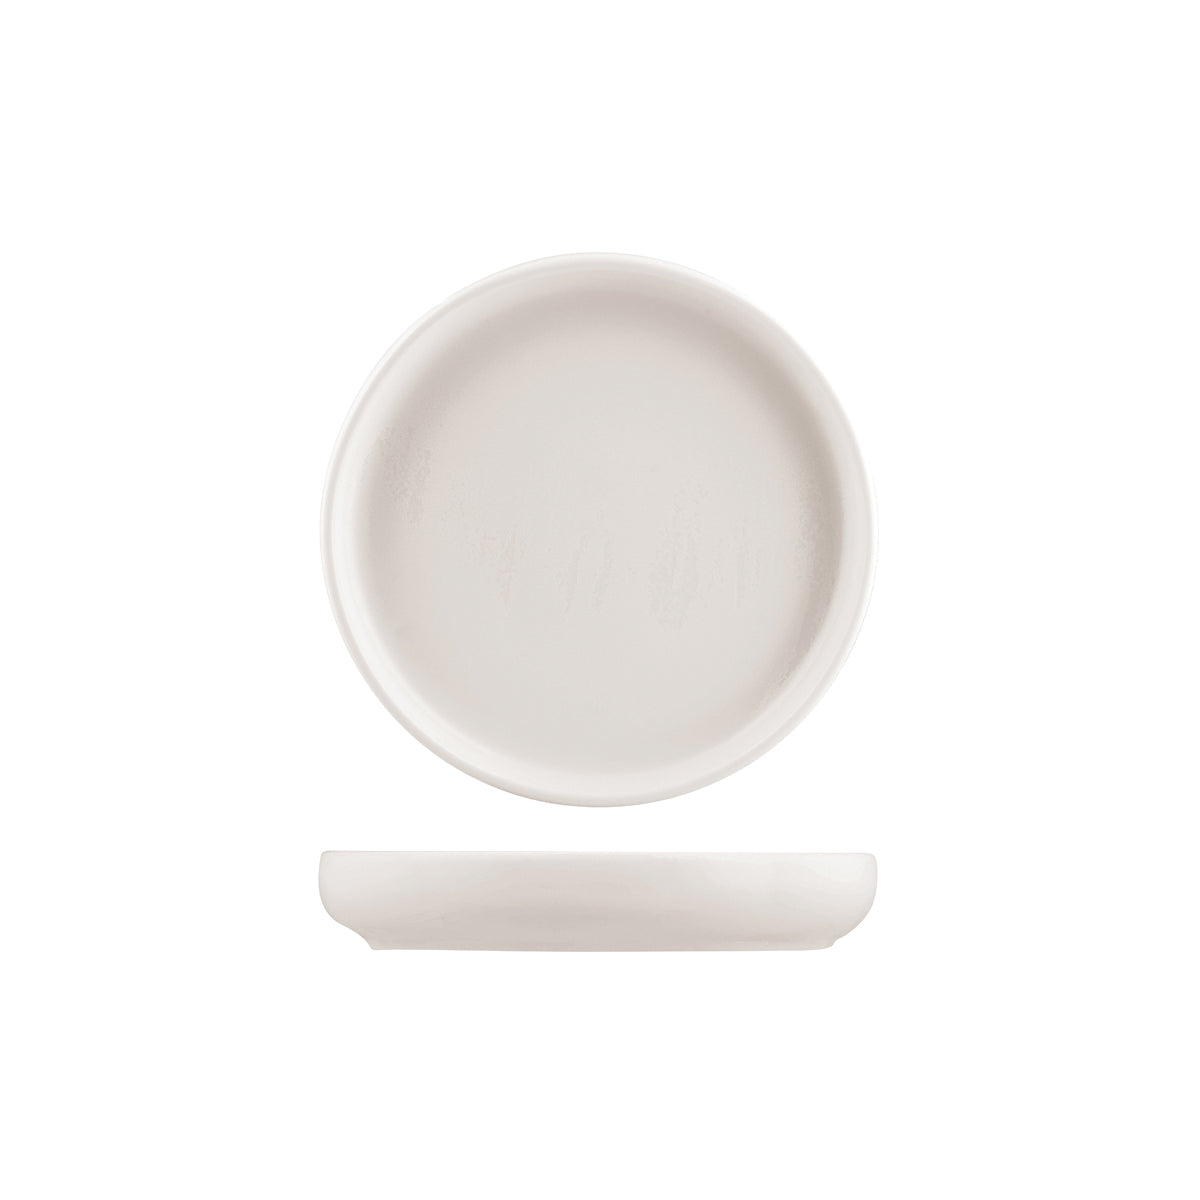 Stackable plate - 210mm, Snow, Moda Porcelain from Moda Porcelain. made out of Porcelain and sold in boxes of 6. Hospitality quality at wholesale price with The Flying Fork! 